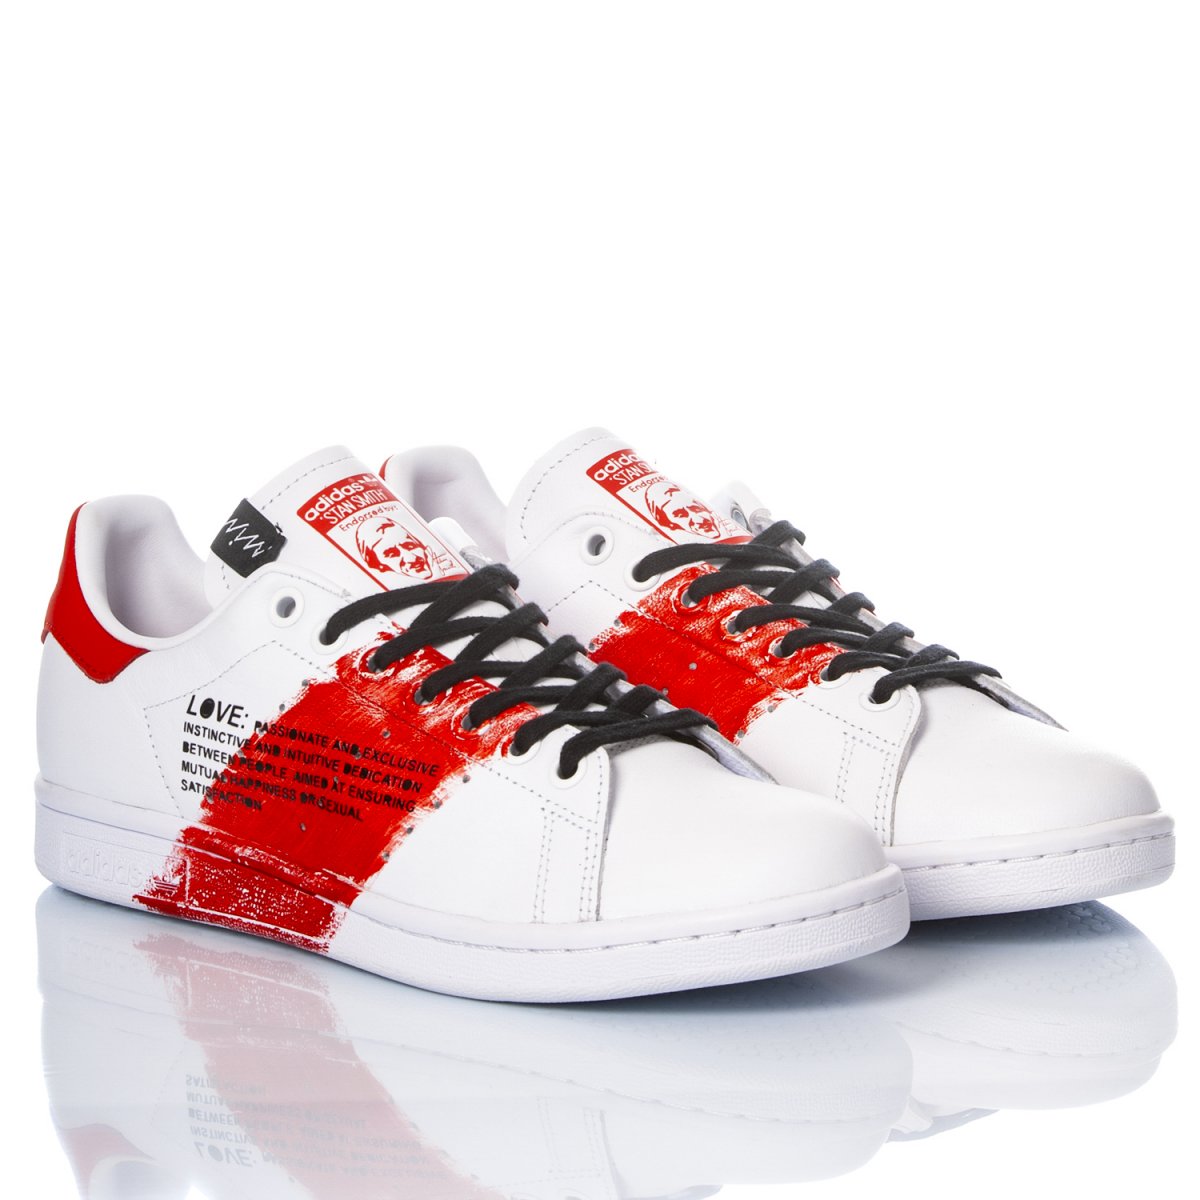 Adidas Stan Smith Amore Stan smith Special